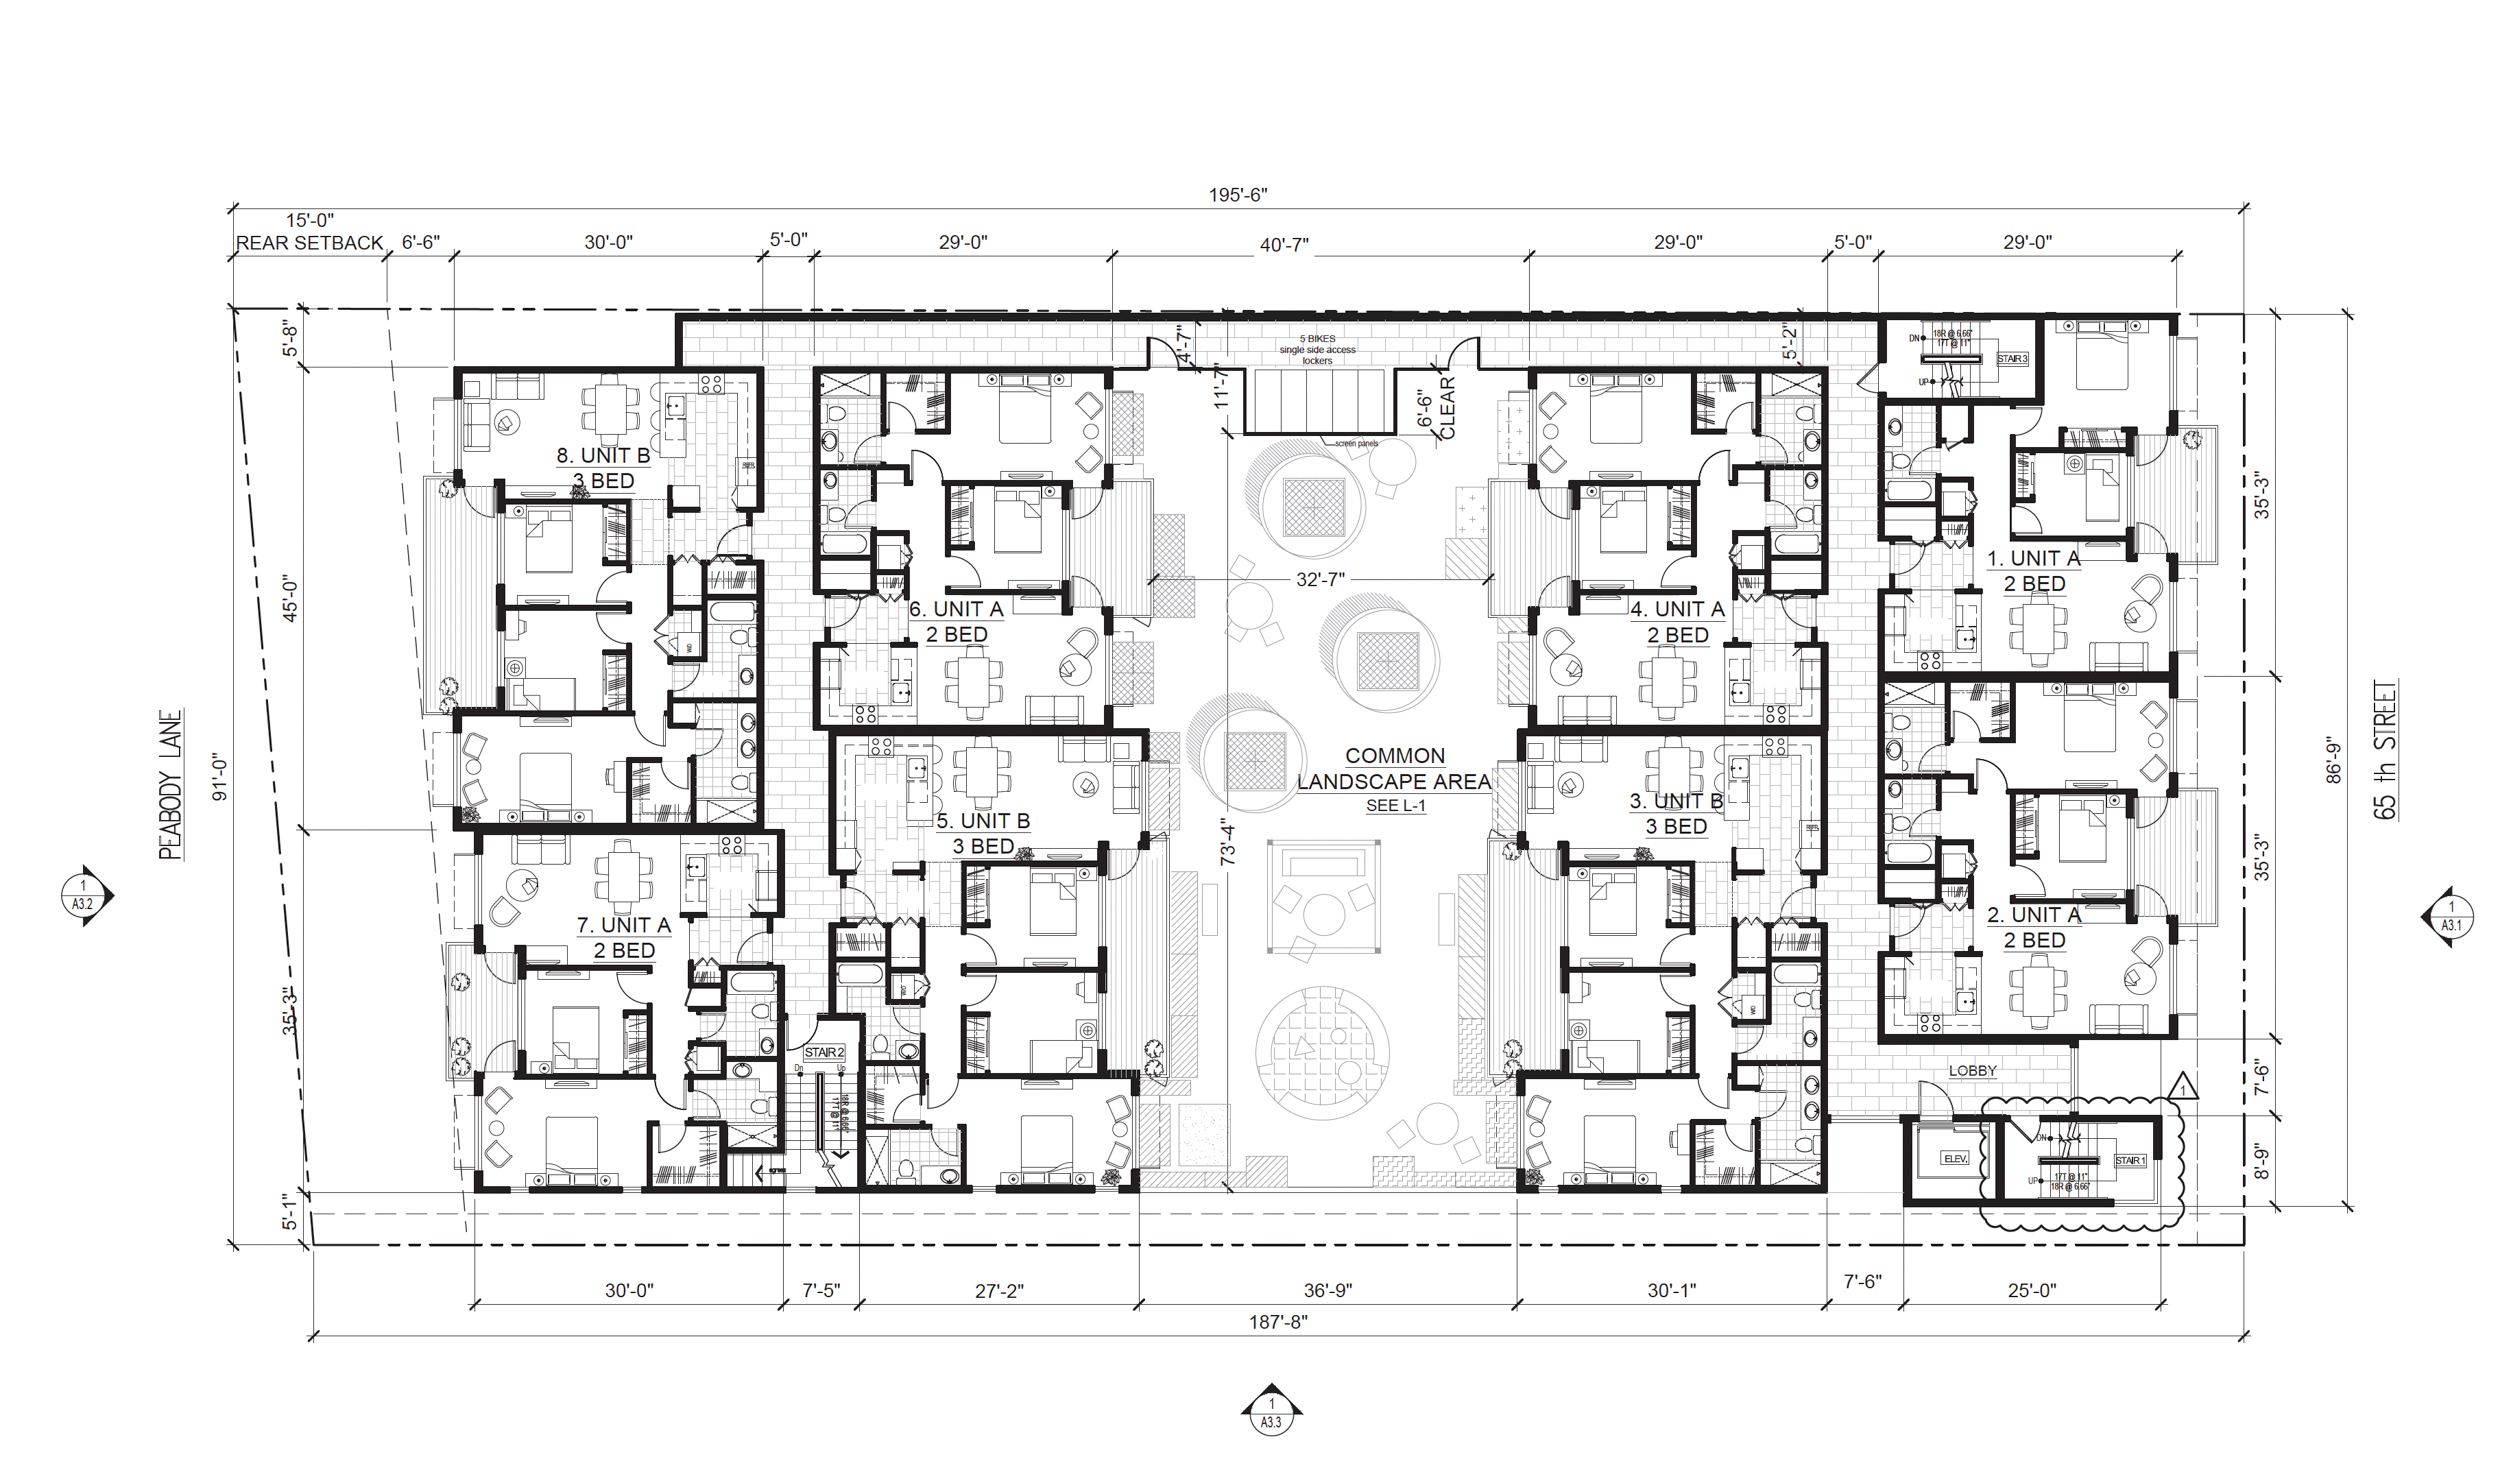 1225 65th Street second-level floor plan, illustration by Dinar and Associates